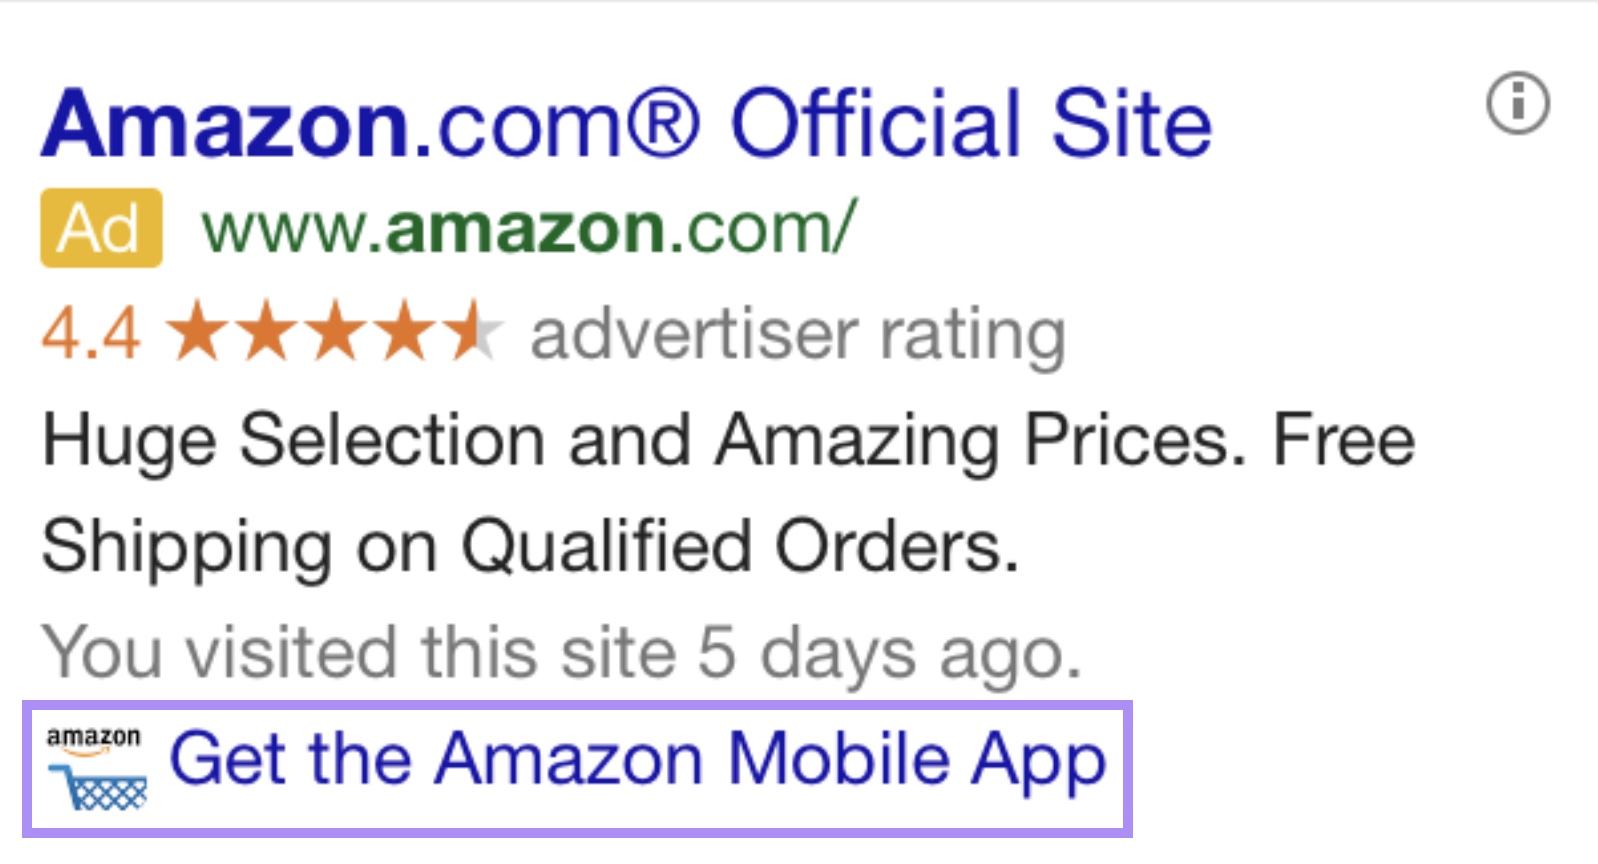 "Get the Amazon Mobile App" extension highlighted under Amazon's ad